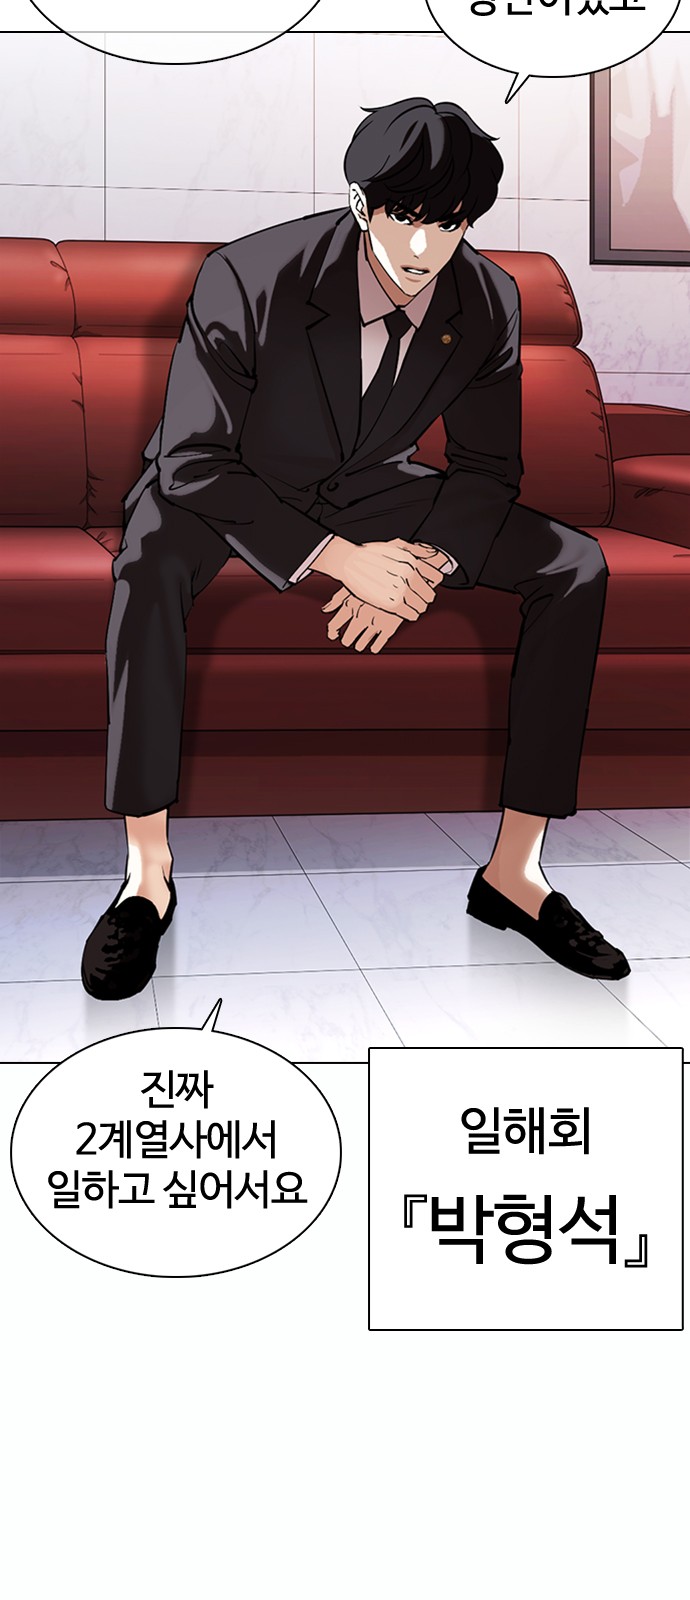 Lookism - Chapter 373 - Page 3